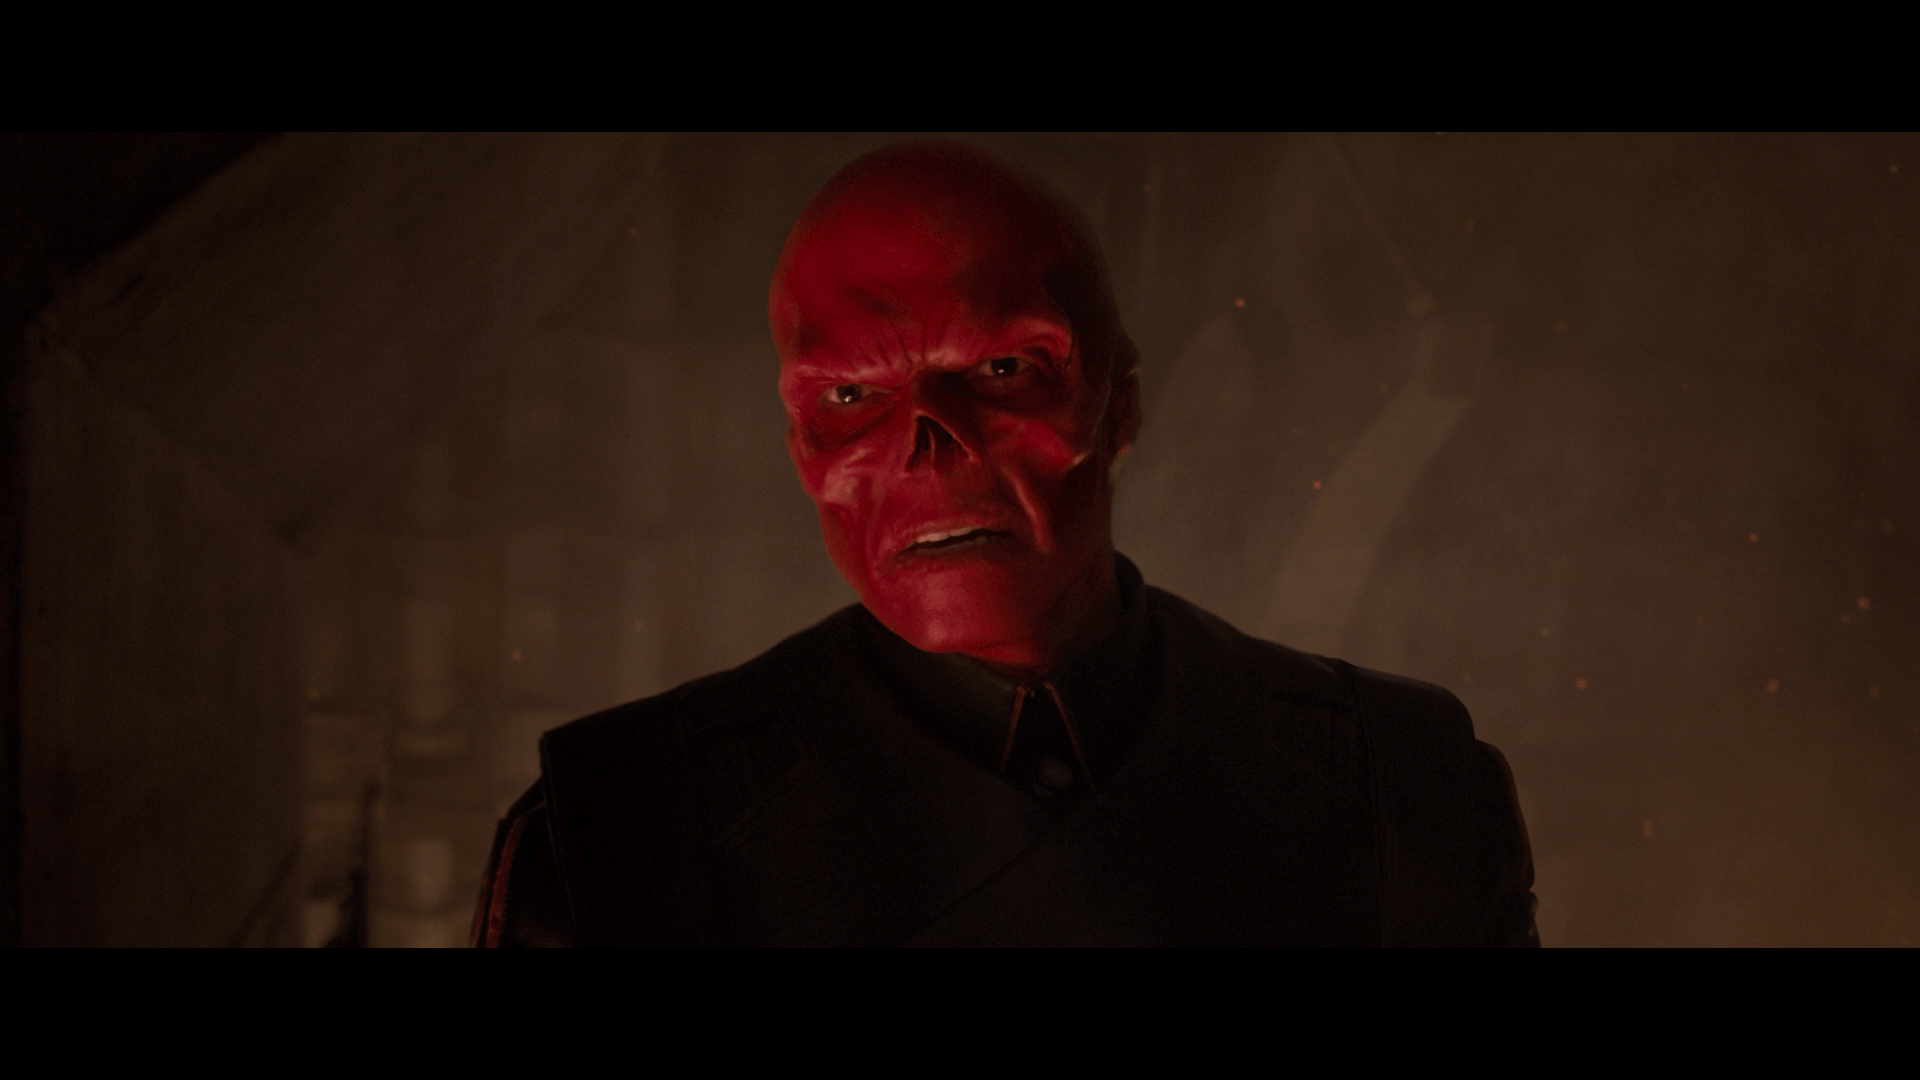 Everday I'm Moustache Twirling: The Red Skull In Captain America